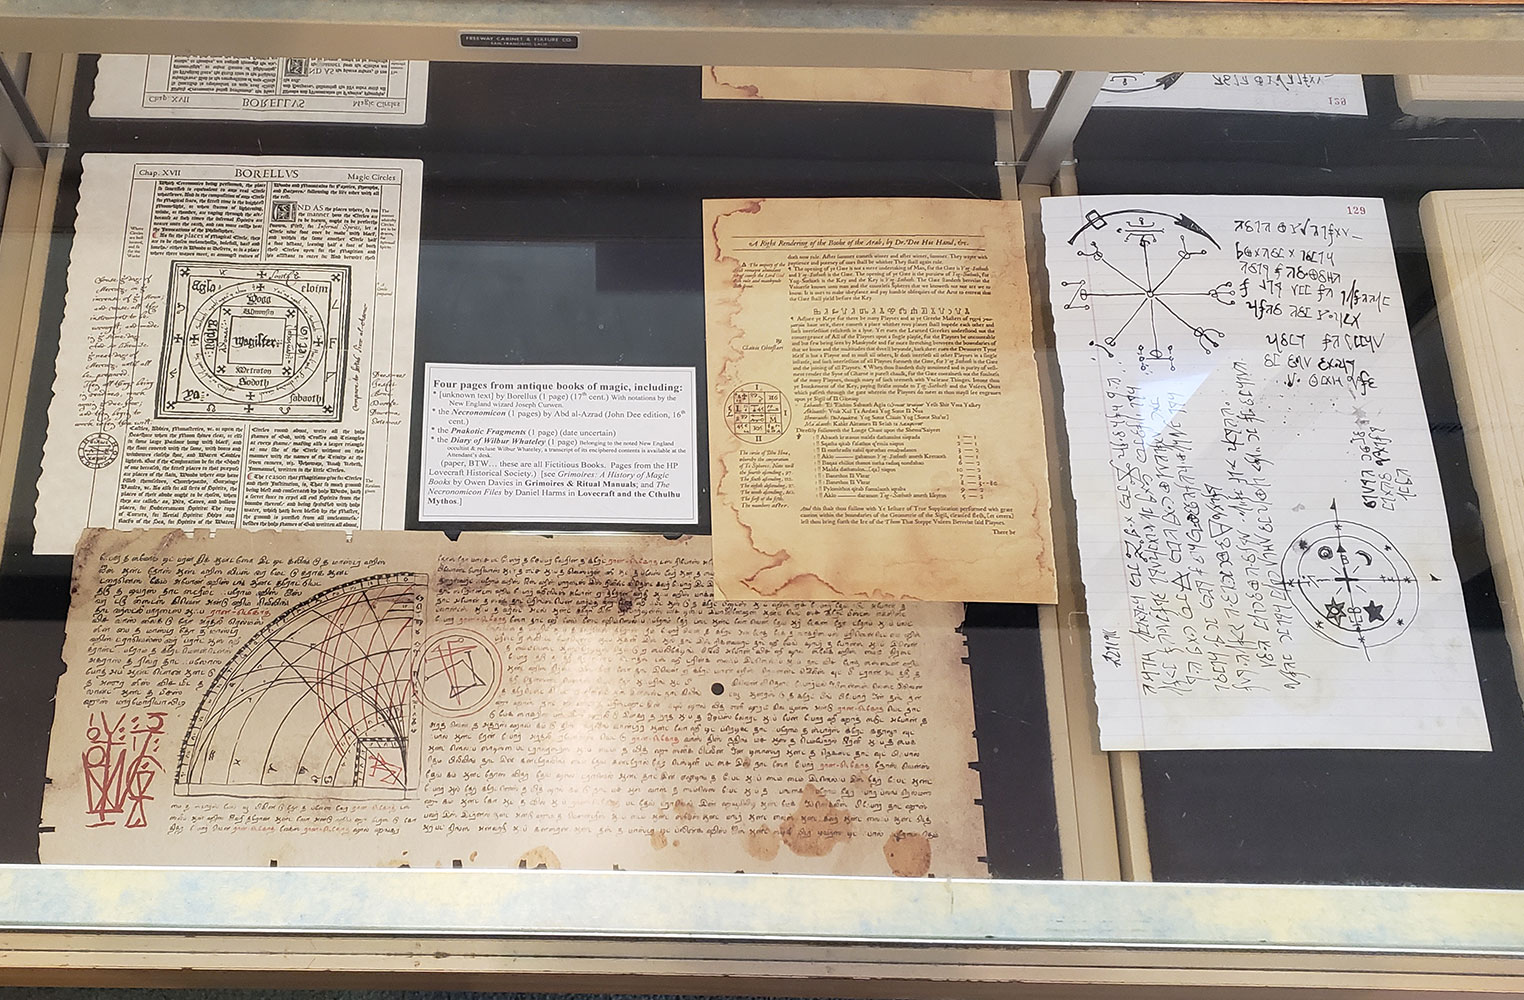 HPLHS prop documents on display at the Adocentyn Library